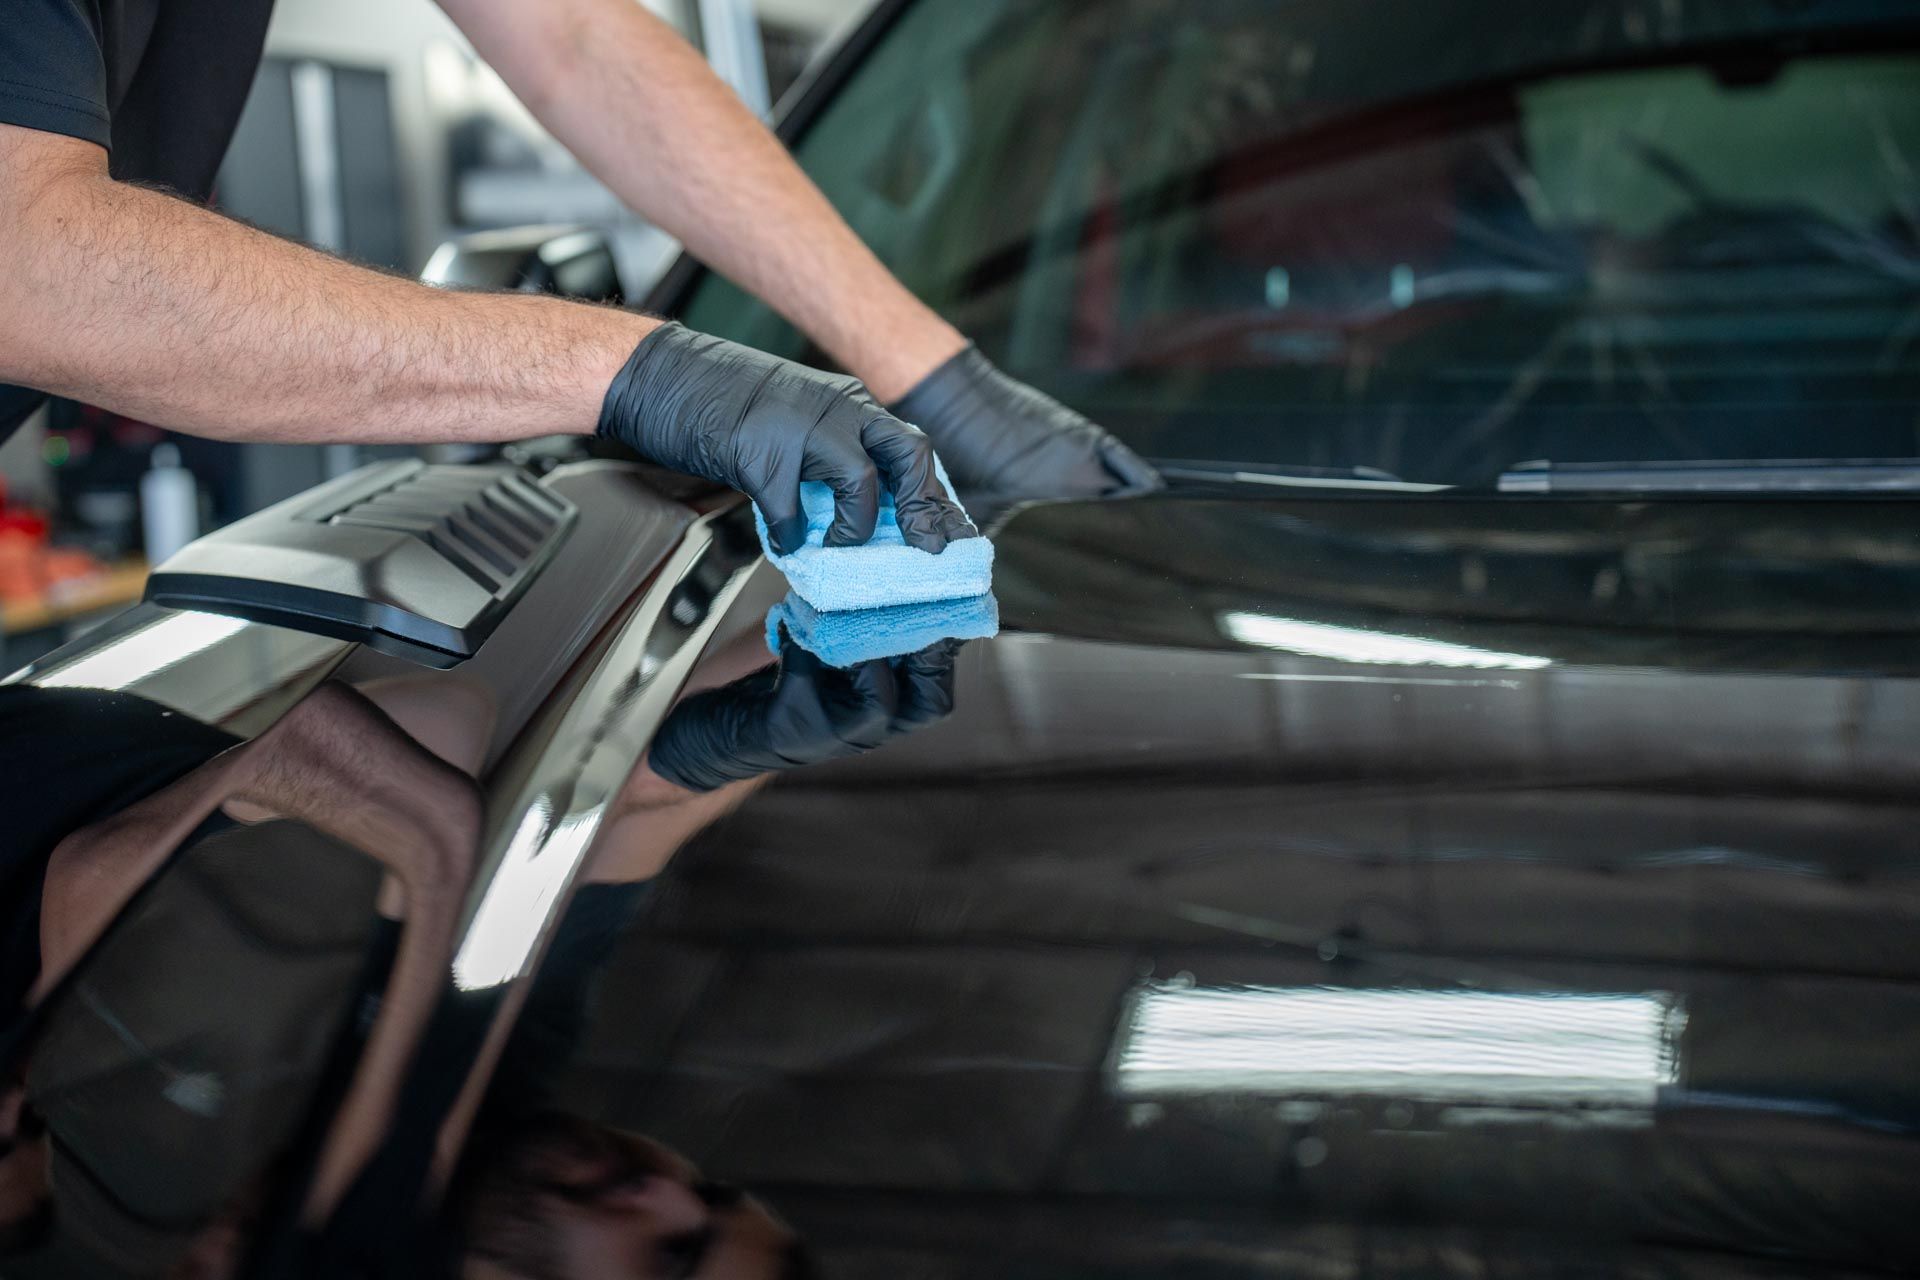 a man wearing black gloves is cleaning a car with a blue sponge